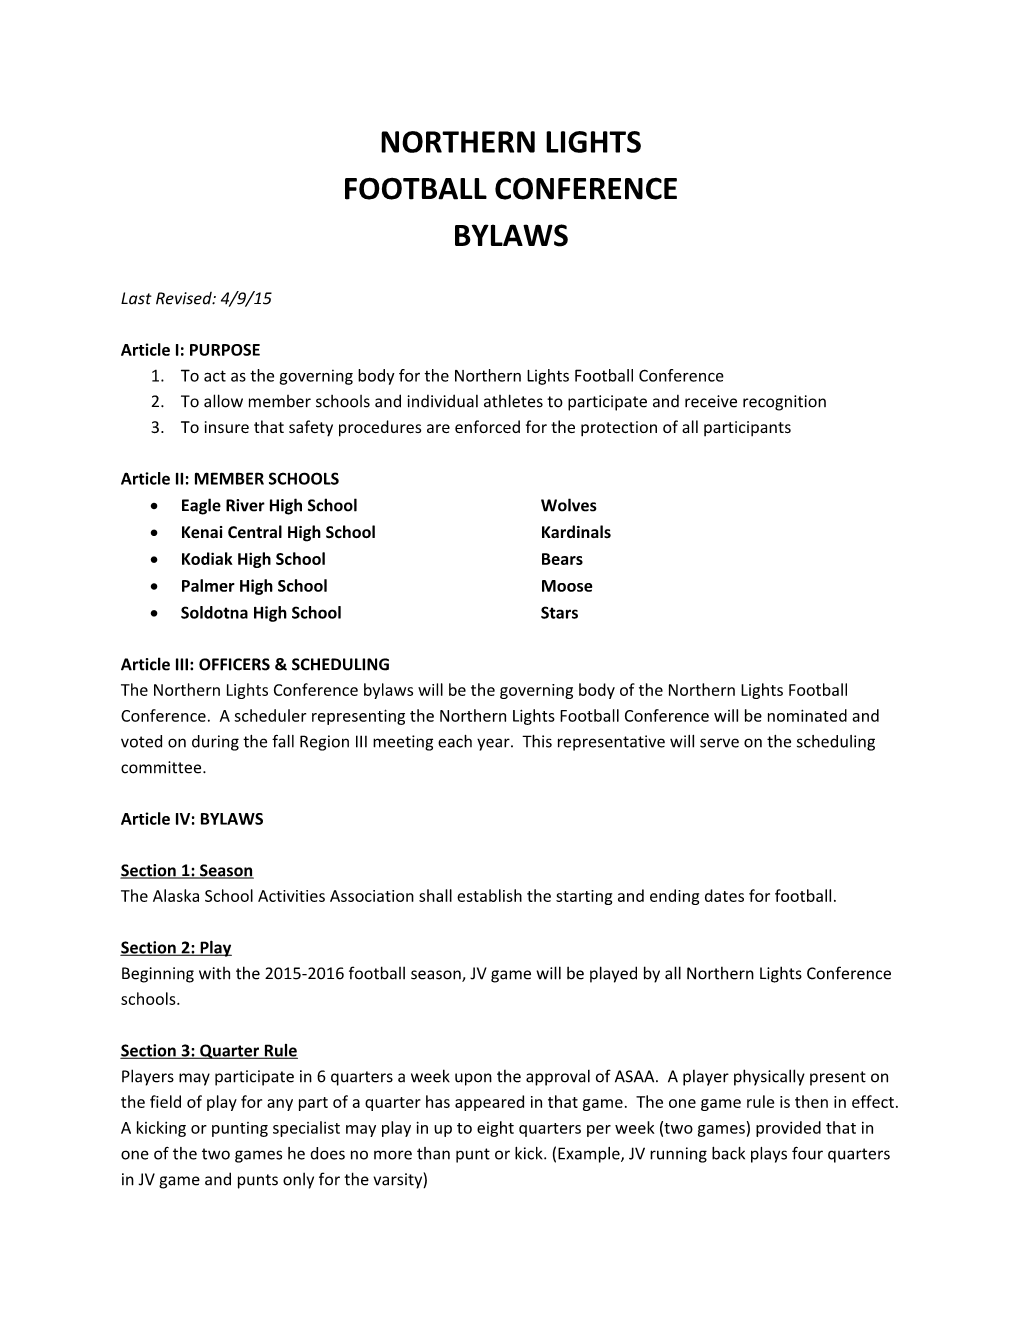 Football Conference